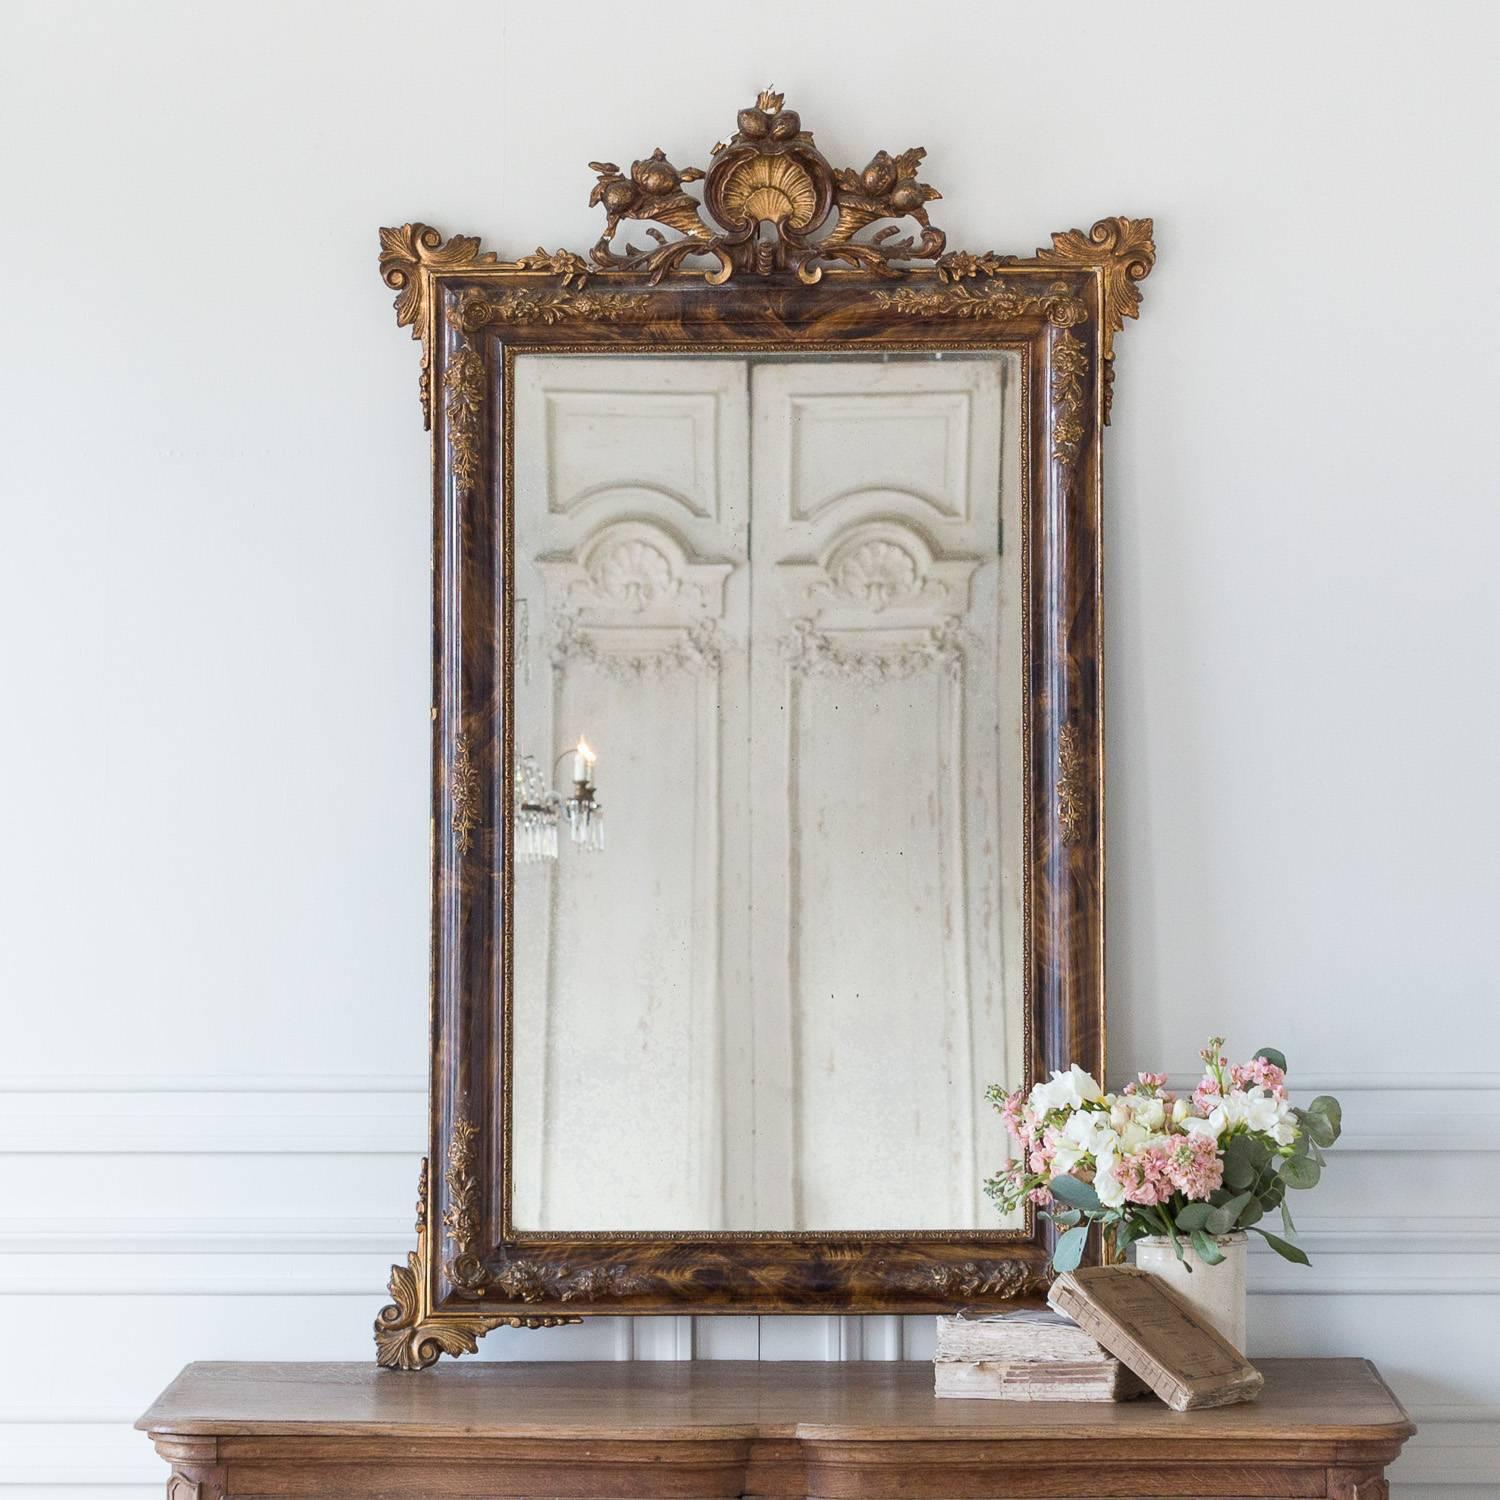 This petite mirror will surely add royal charm to a hallway or entryway. The mirror features an elaborate design with a large crest of a shell. Cornucopias frame the crest, spilling fruit and flowers towards the shoulders of the piece. The original